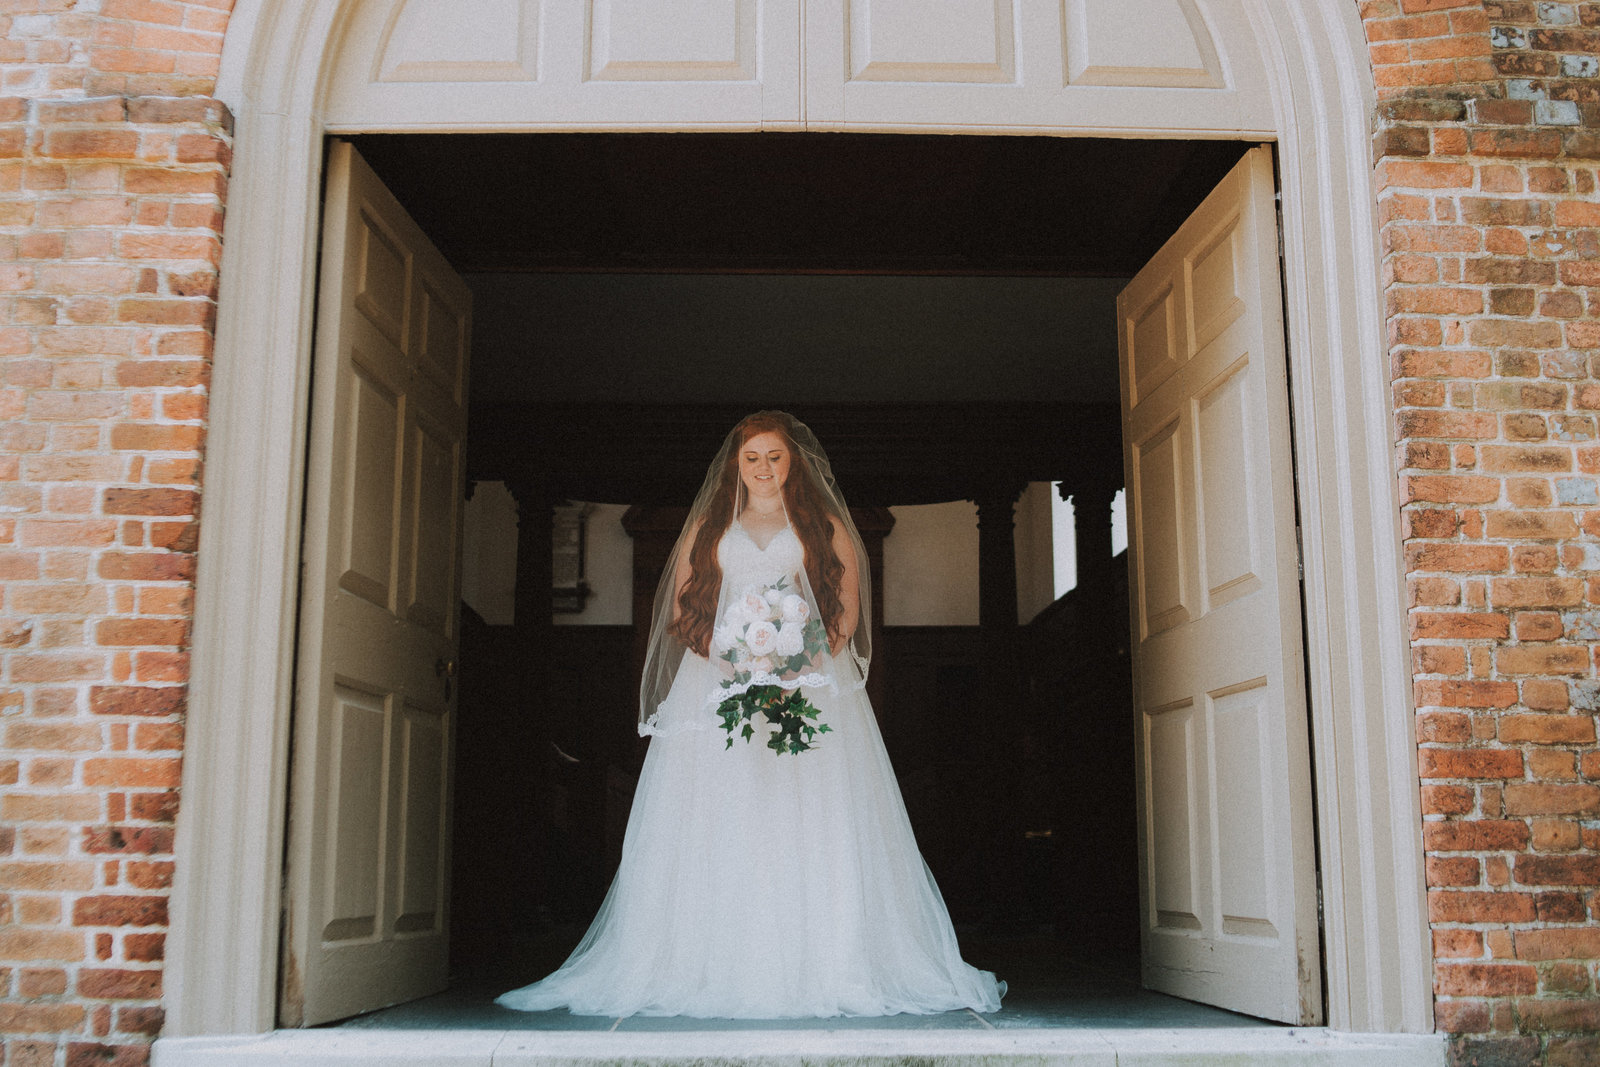 Bridal Portraits at Pate Chapel, William and Mary